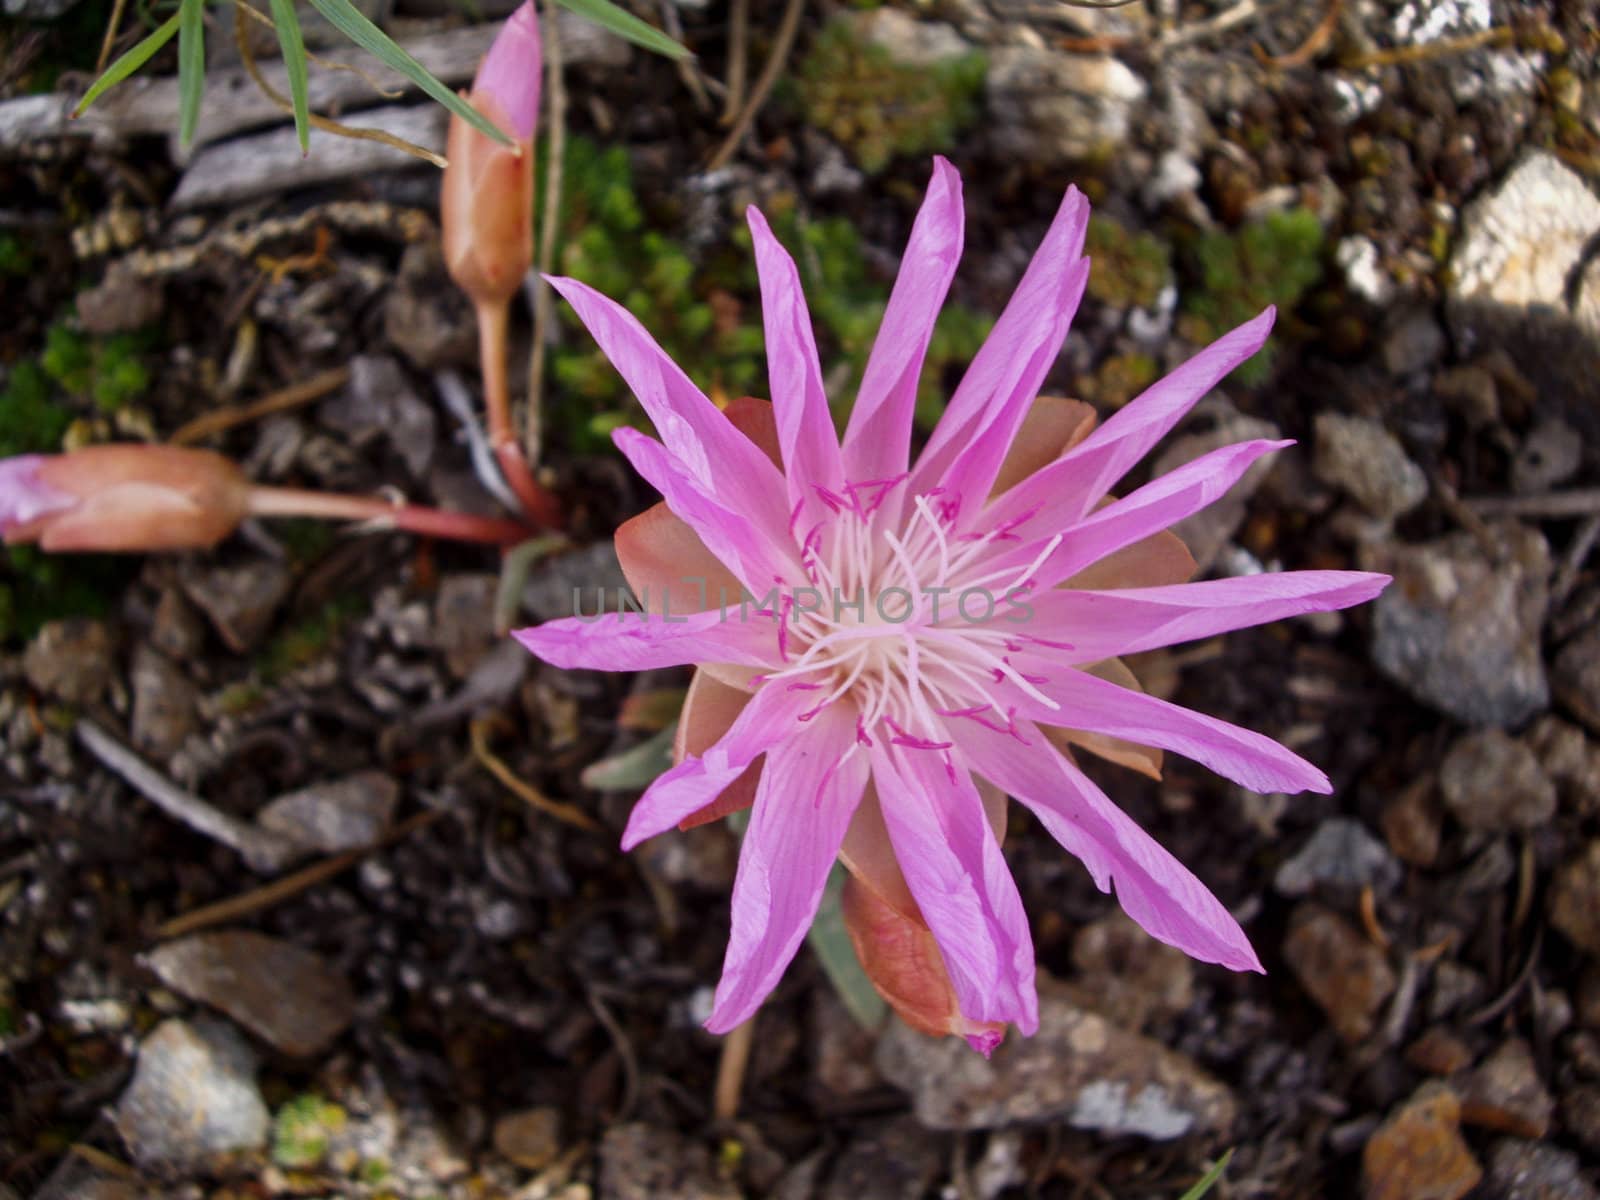 Pink flower blooms for short time in Yellowstone Spring